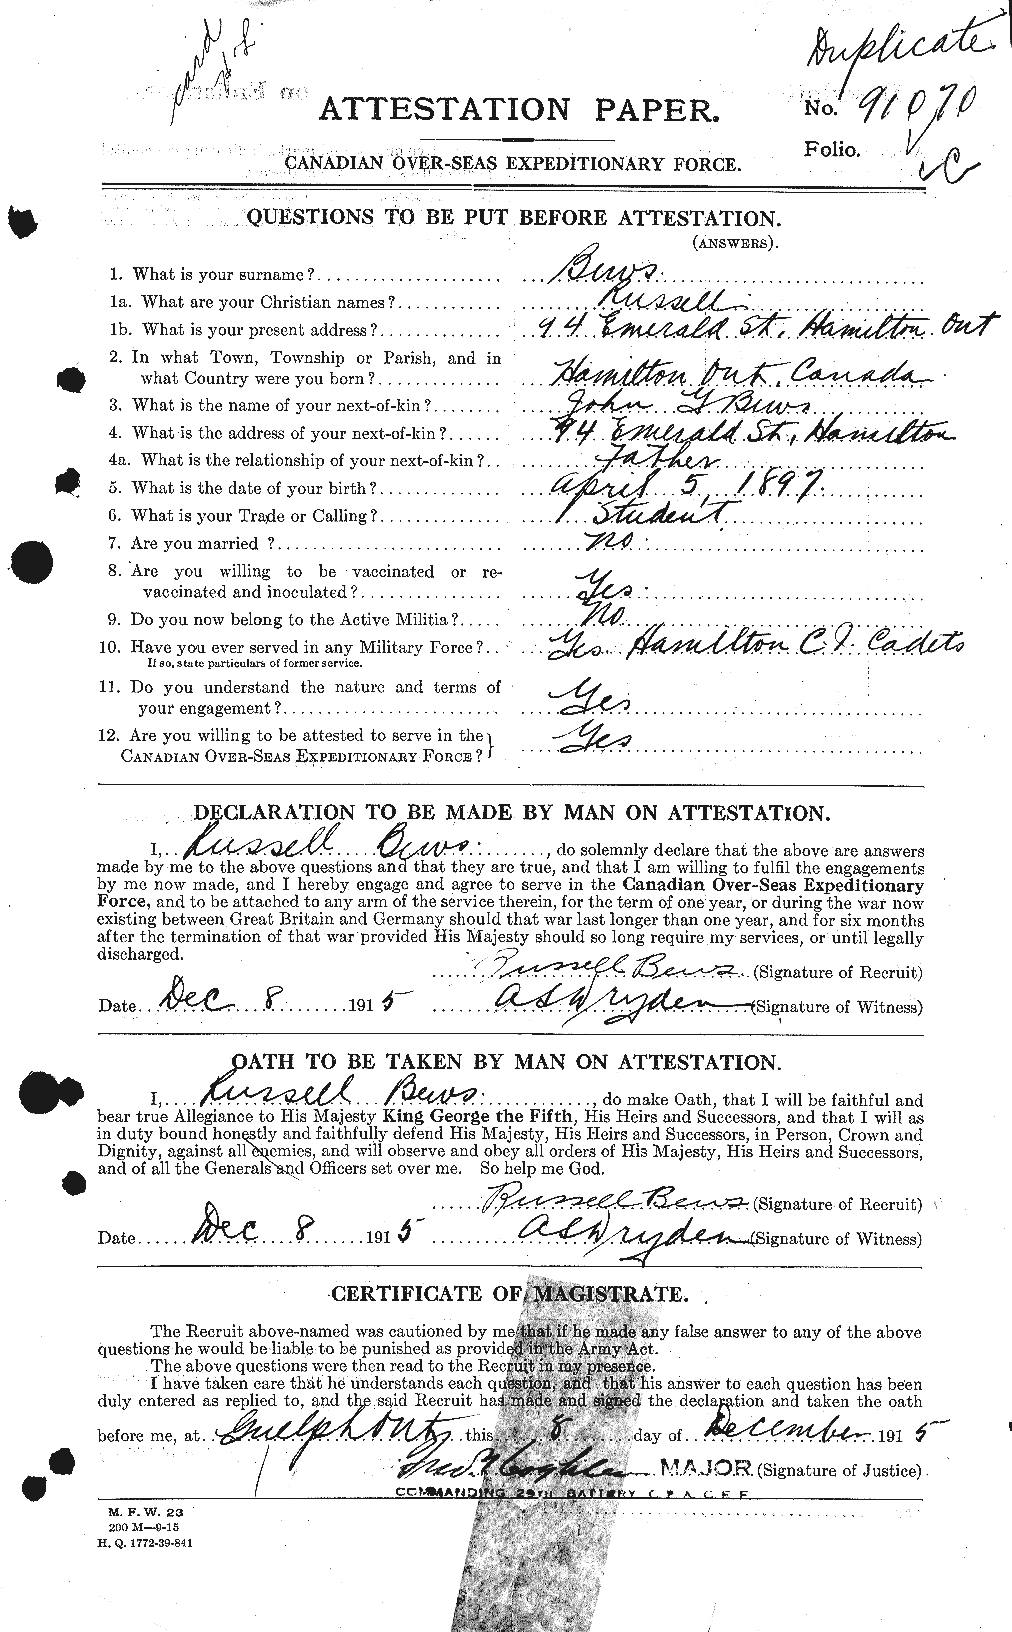 Personnel Records of the First World War - CEF 237473a